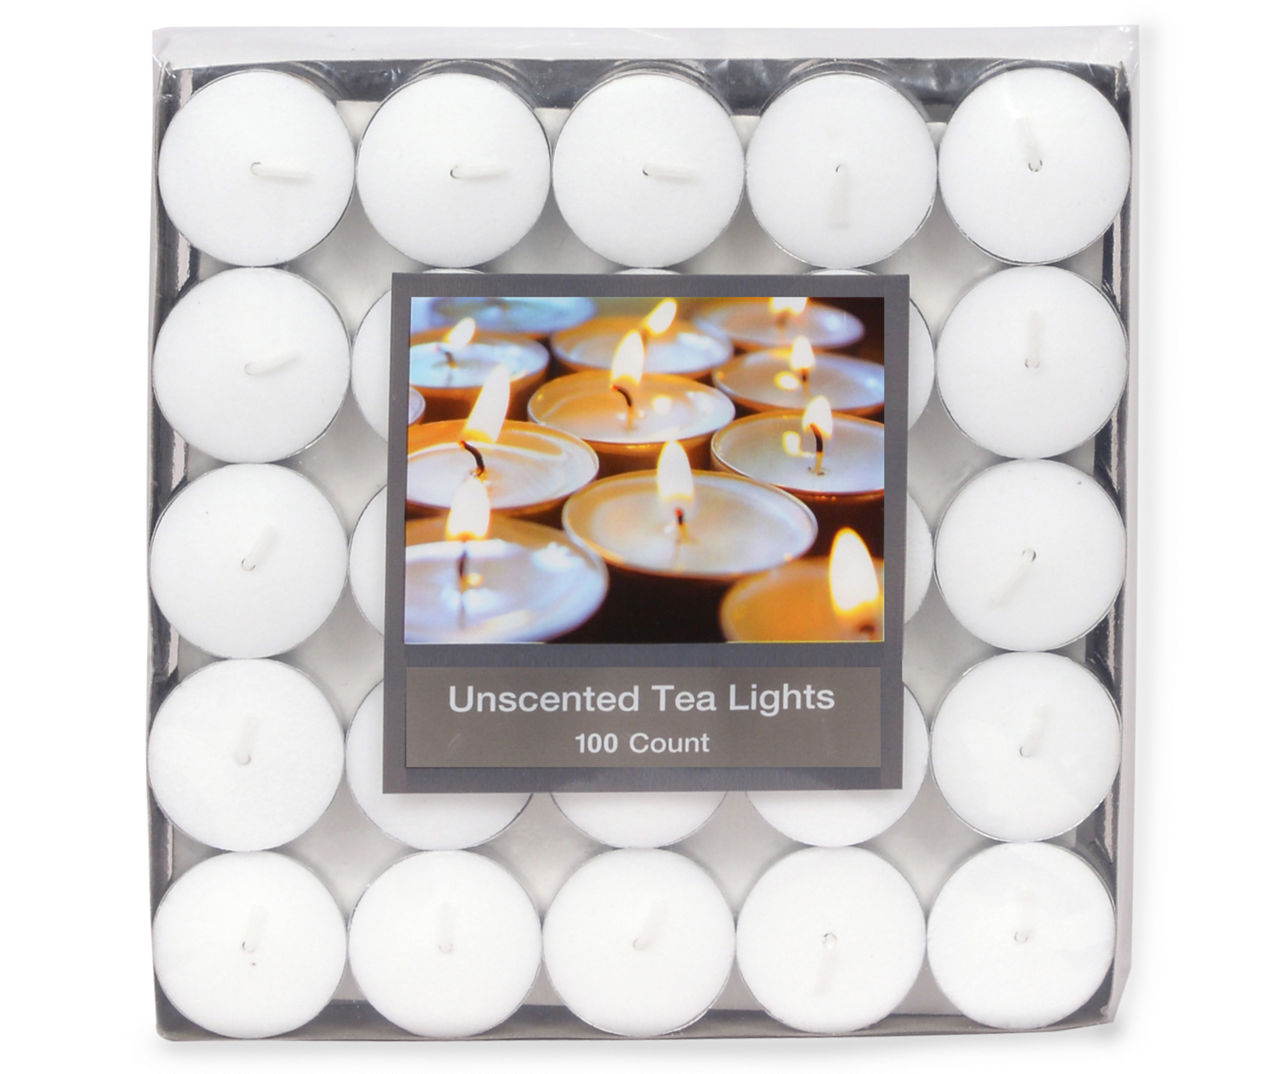 NuCandle Tea Lights Candles 100 Pack Unscented Tealight Candles Bulk for  Wedding Christmas Home Decorative Outdoor Mini White Tea Lights Candle